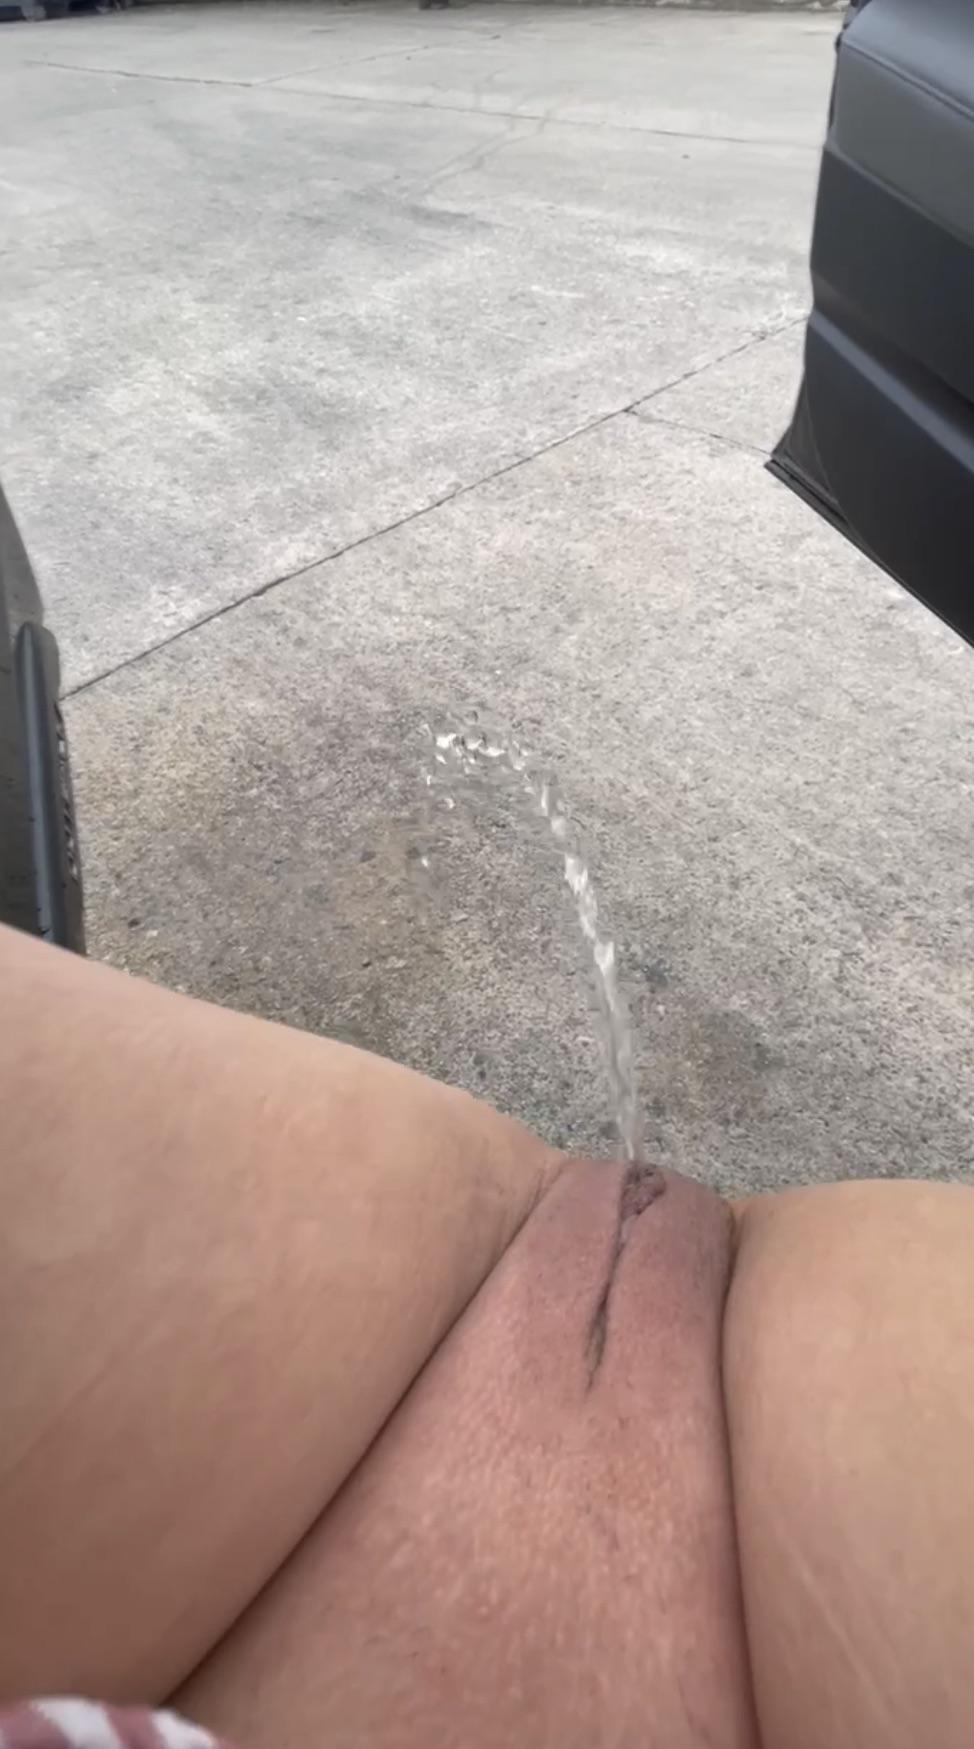 Emptying my piss in their parking lot before sitting in the salon chair for a couple